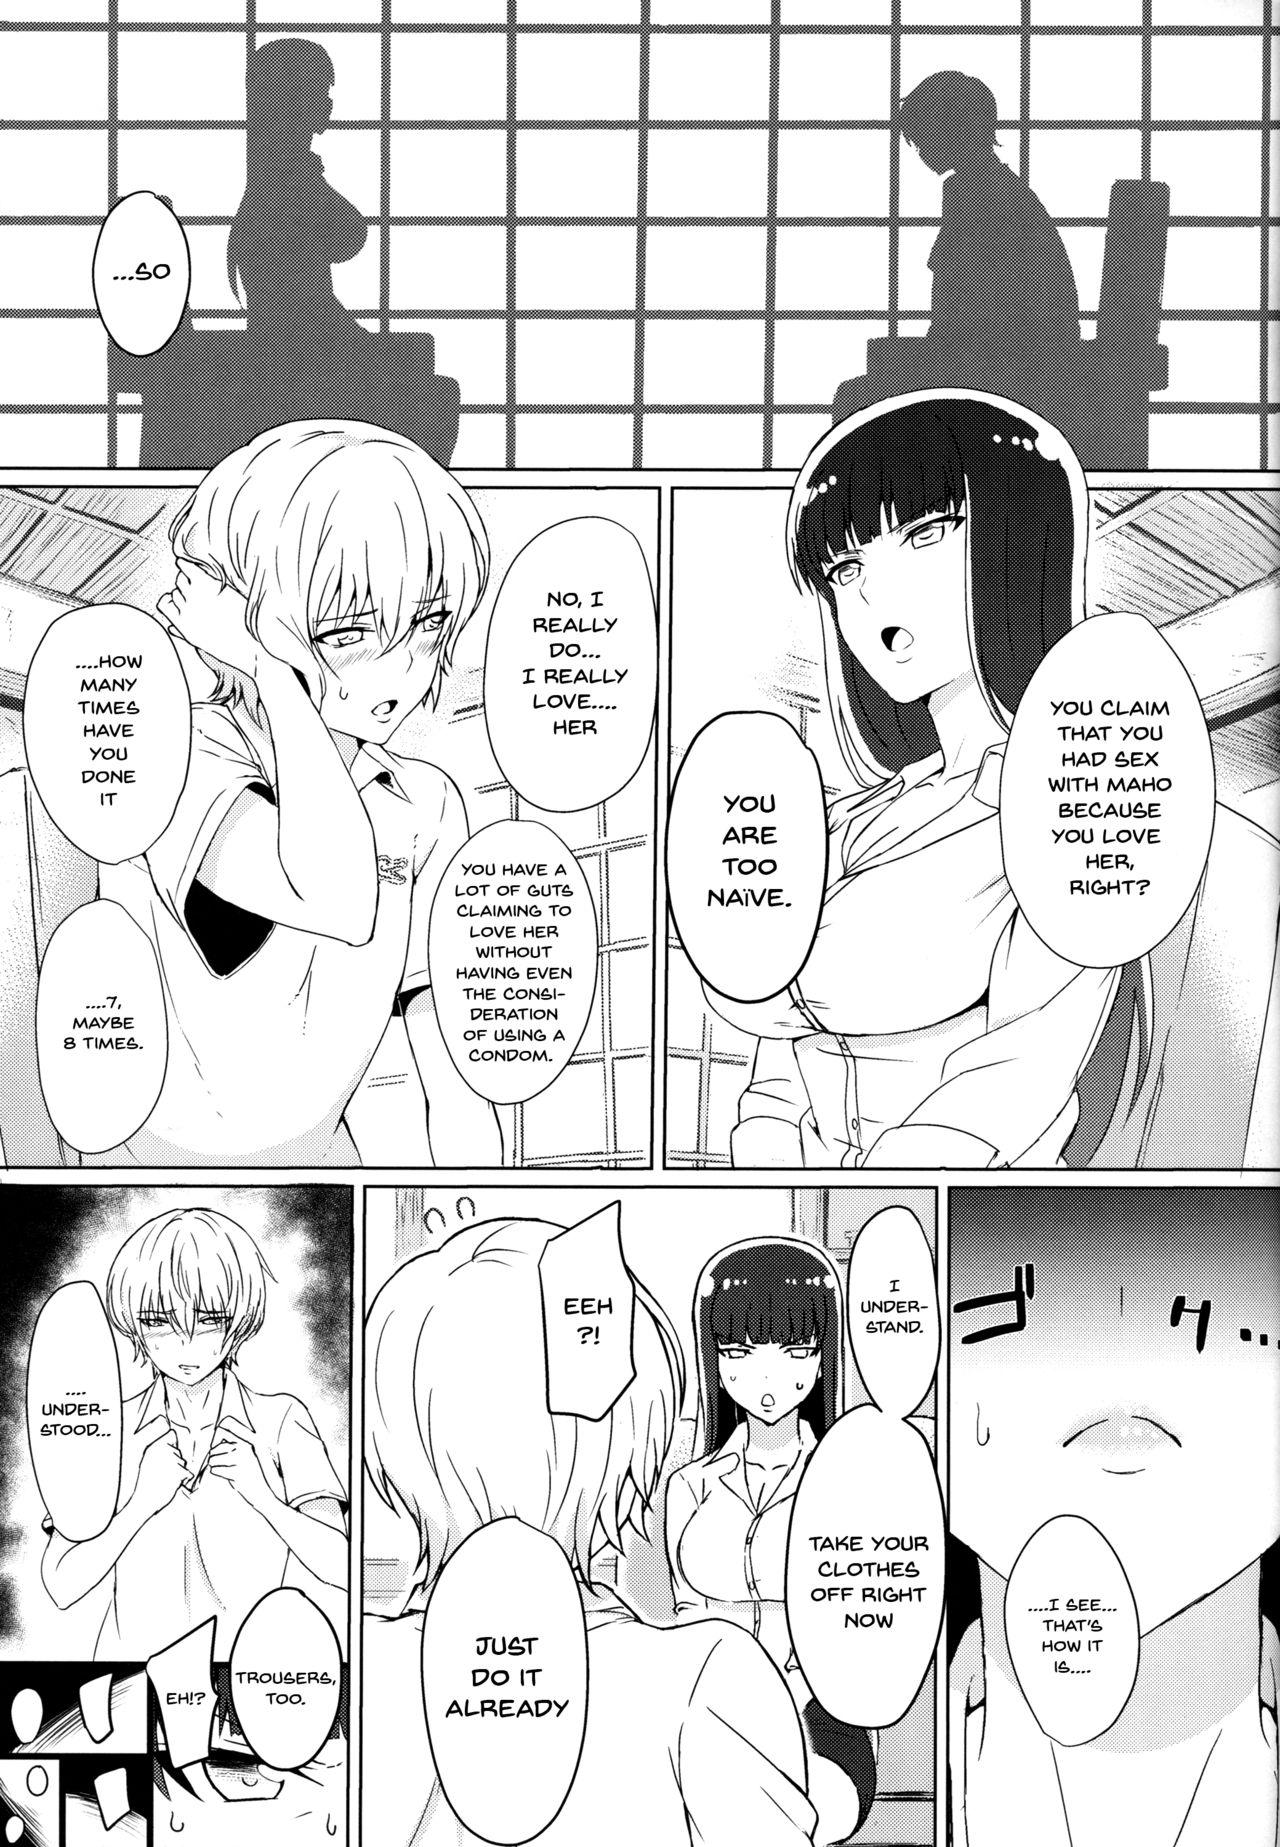 Legs Wakai Otoko to Shihox | Doing It With a Younger Guy - Girls und panzer She - Page 4